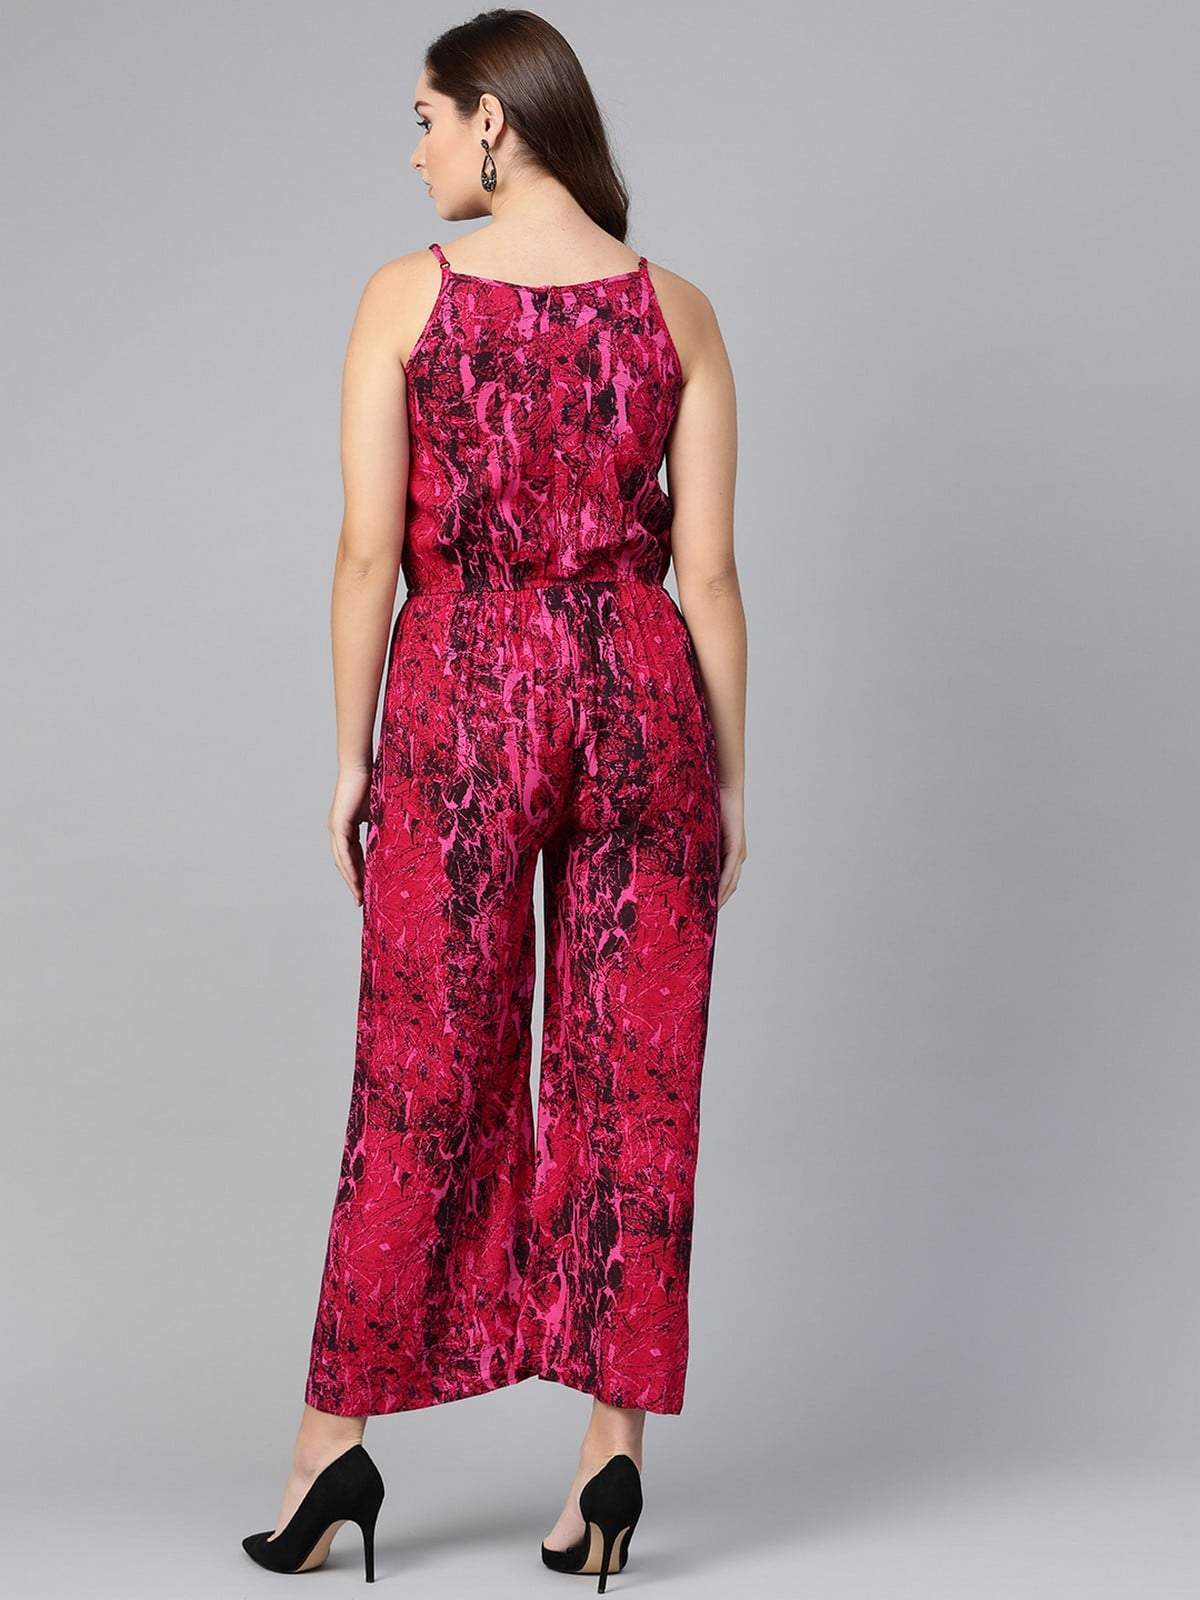 Women's Printed Strappy Jumpsuit - Pannkh